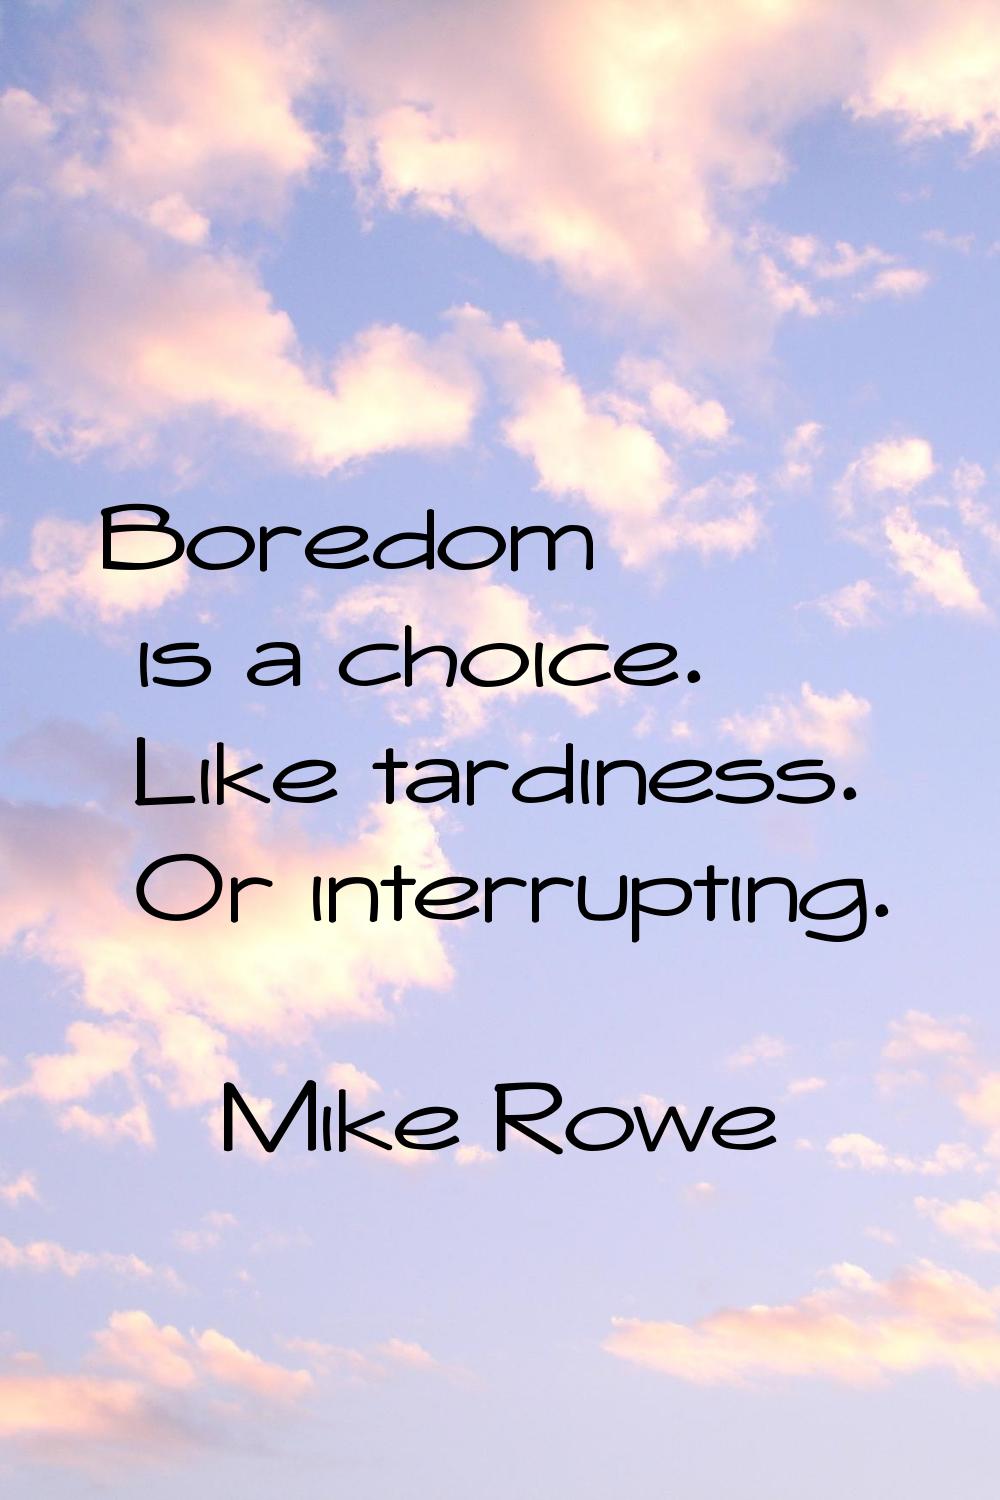 Boredom is a choice. Like tardiness. Or interrupting.